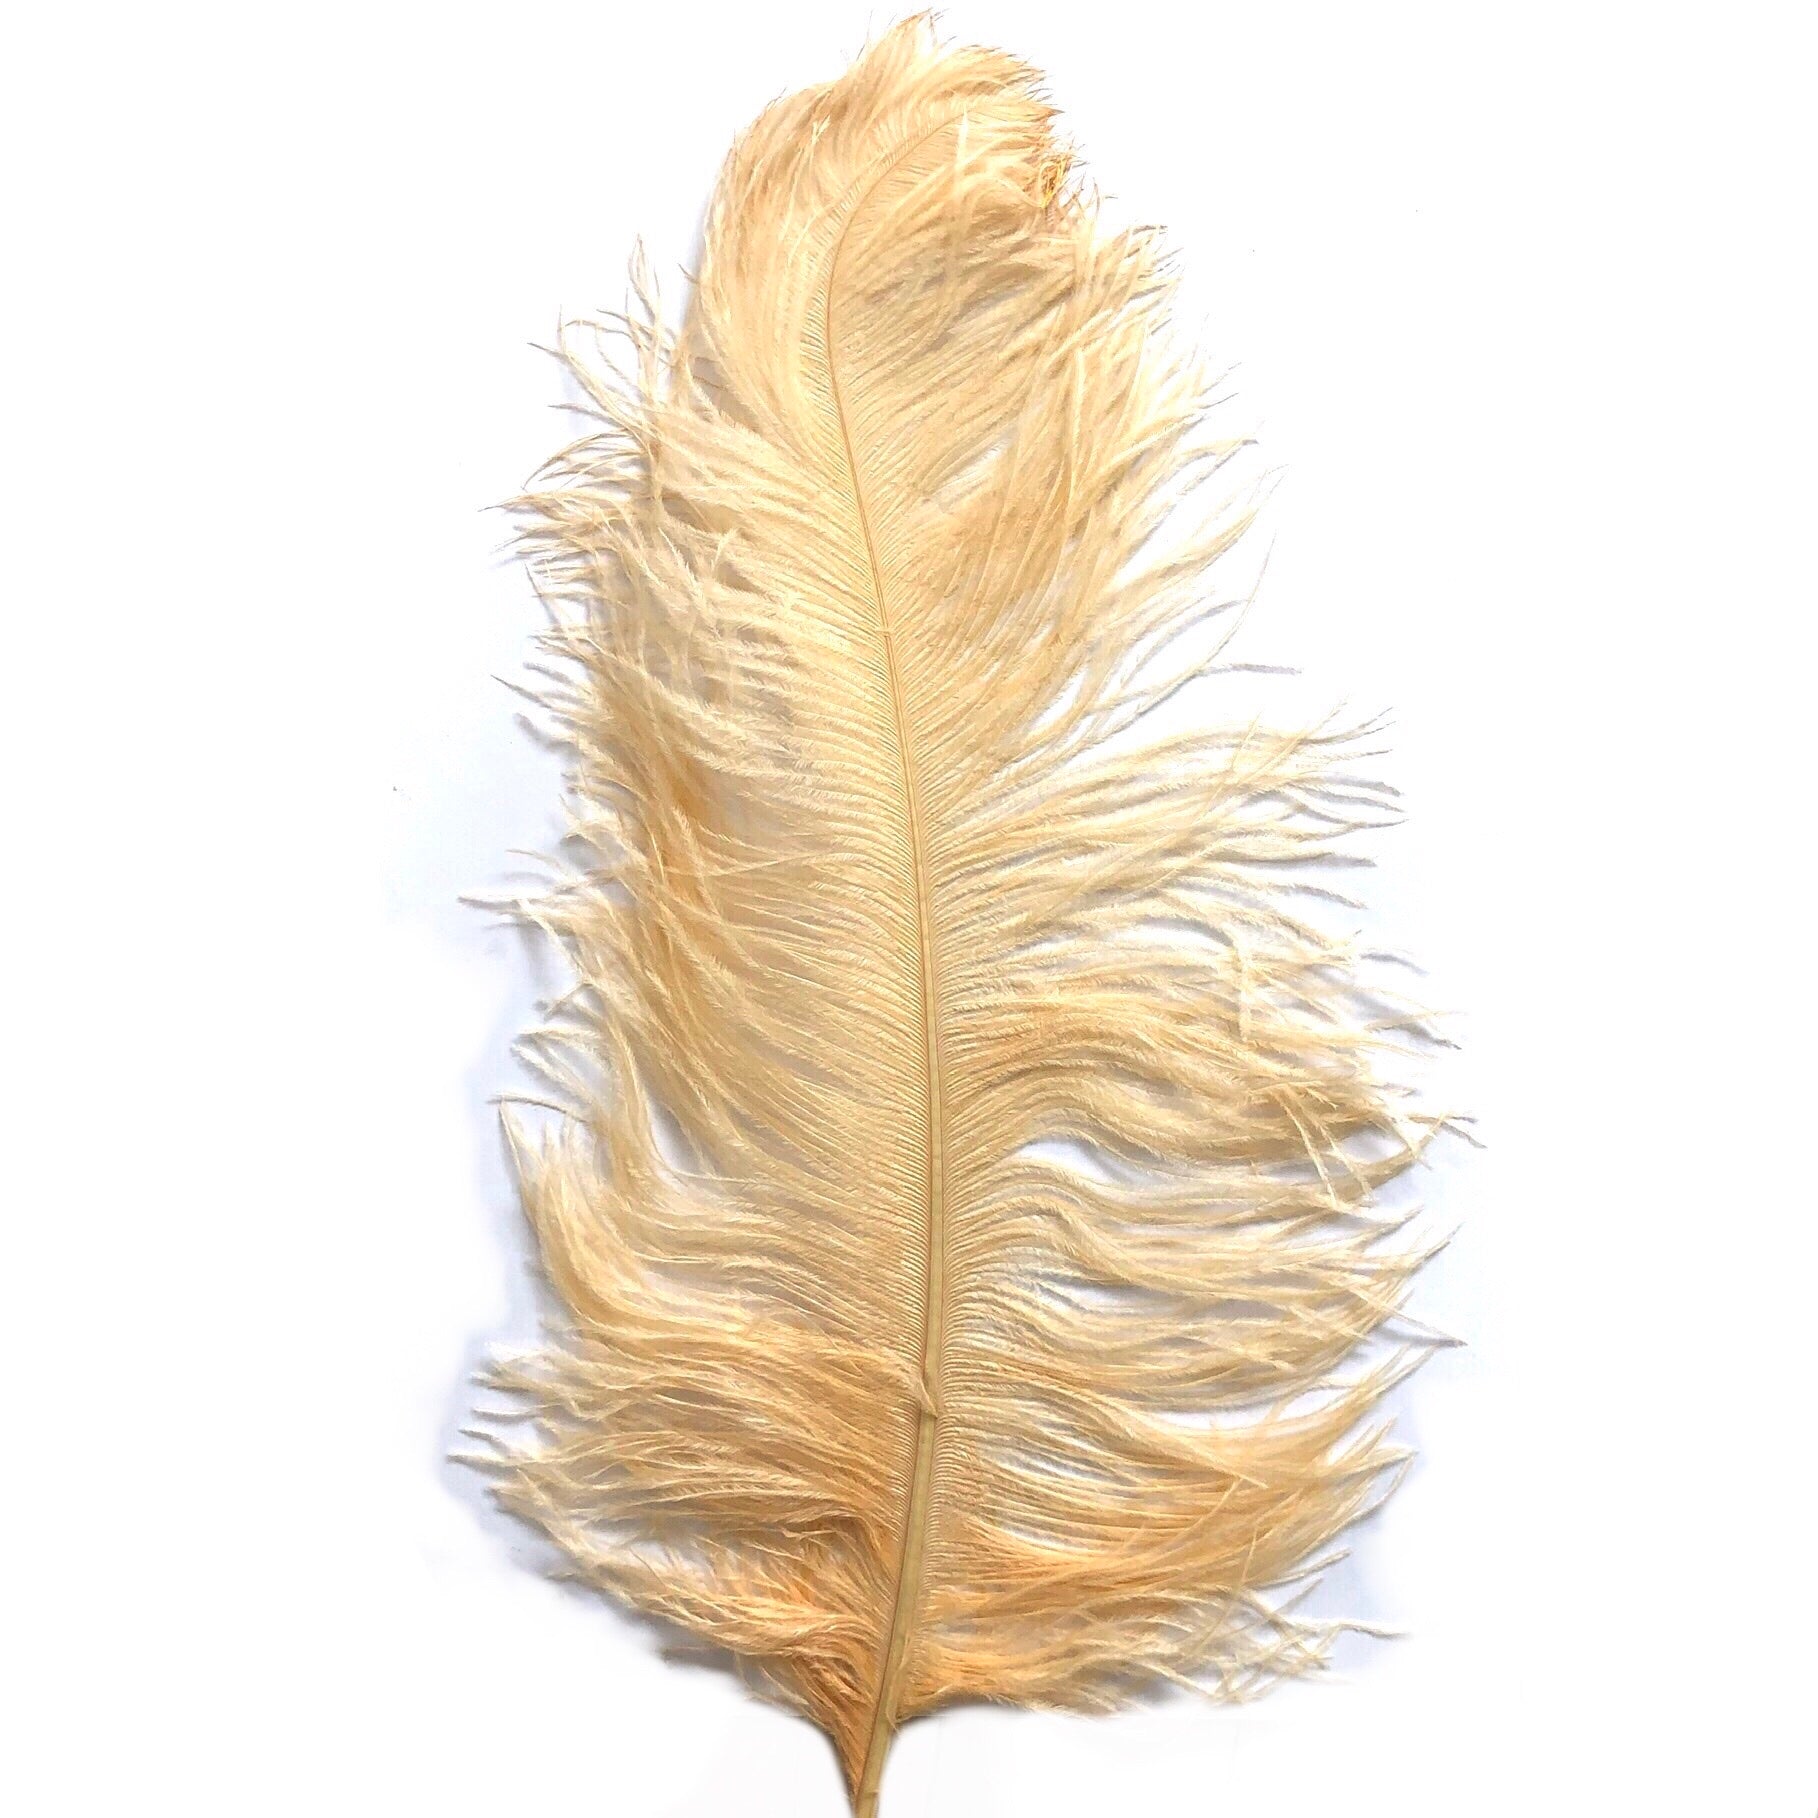 Ostrich Wing Feather Plumes 60-65cm (24-26") - Soft Apricot